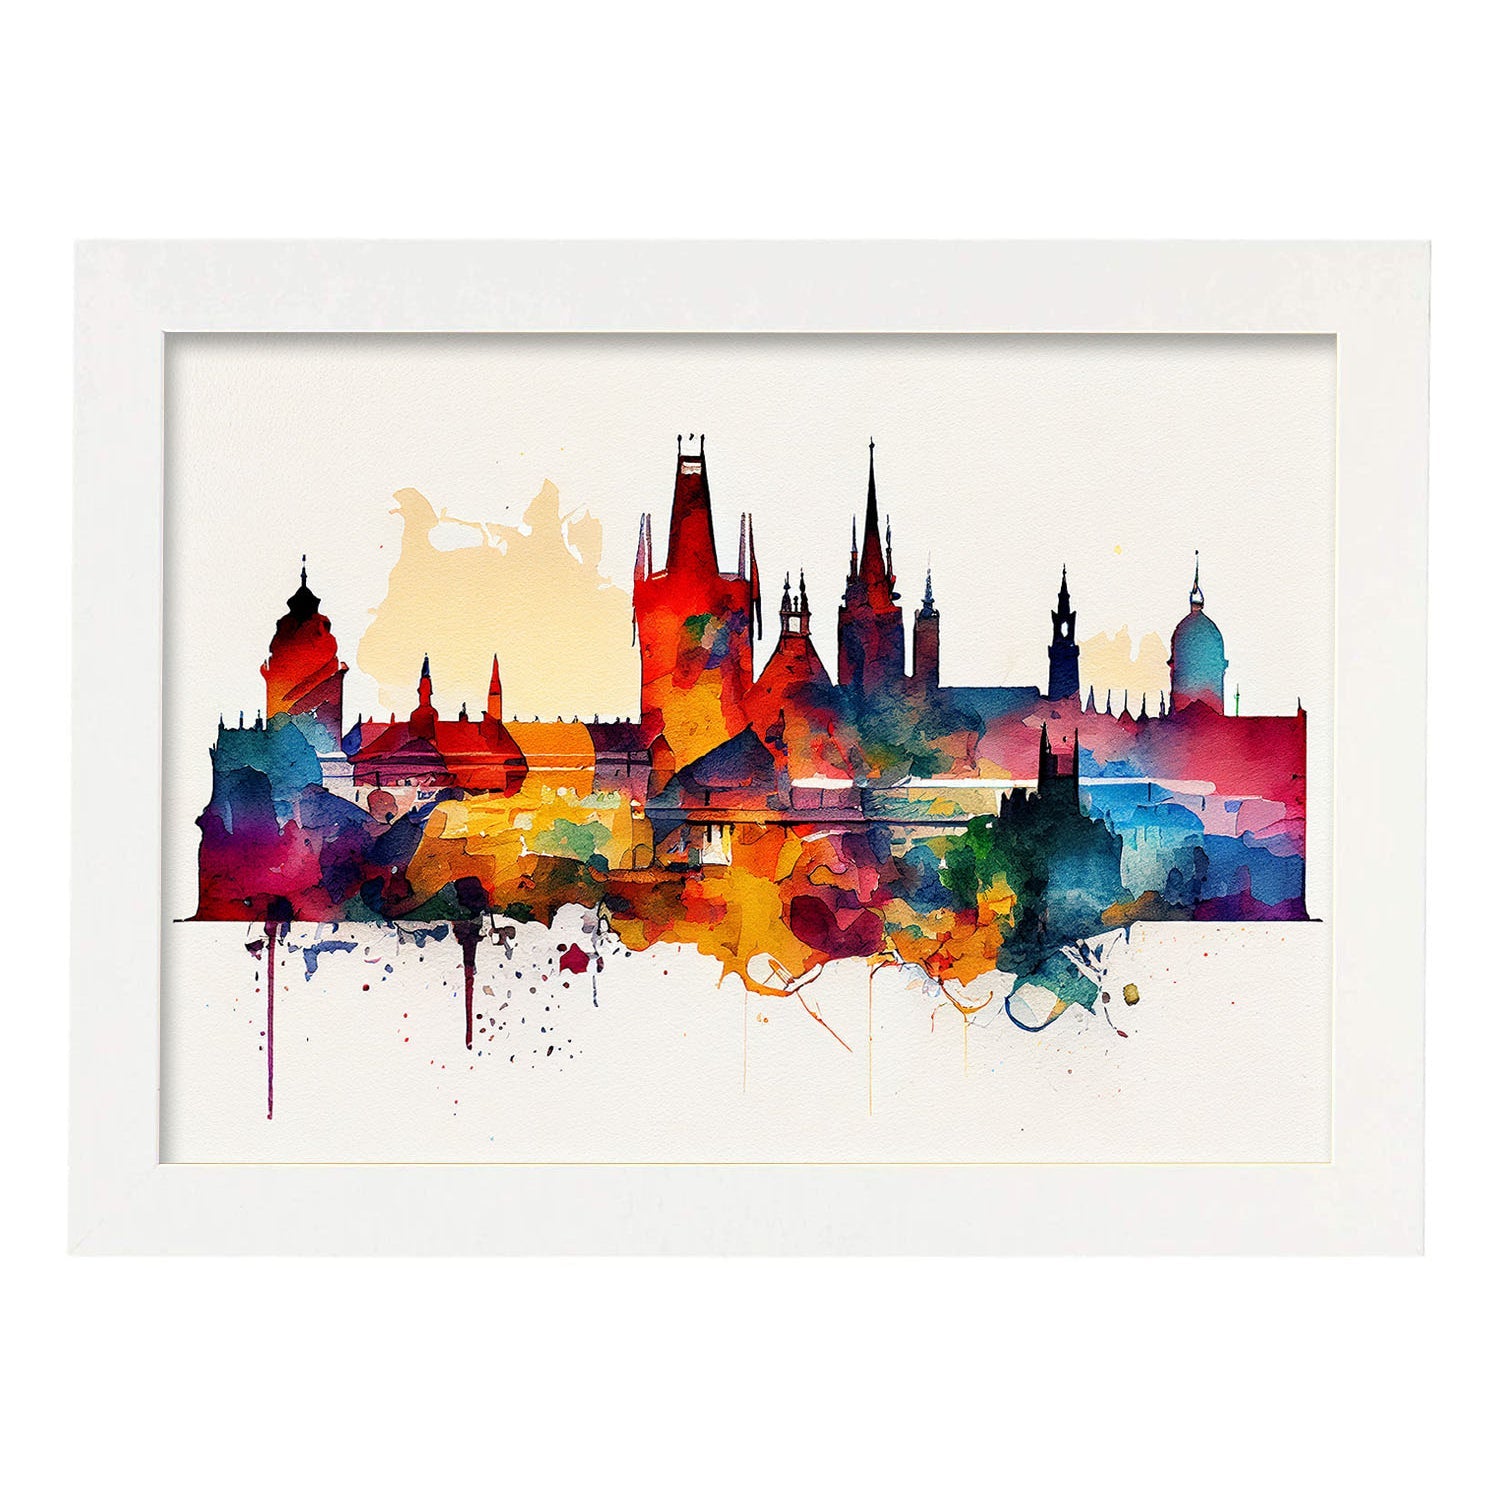 Nacnic watercolor of a skyline of the city of Prague_3. Aesthetic Wall Art Prints for Bedroom or Living Room Design.-Artwork-Nacnic-A4-Marco Blanco-Nacnic Estudio SL